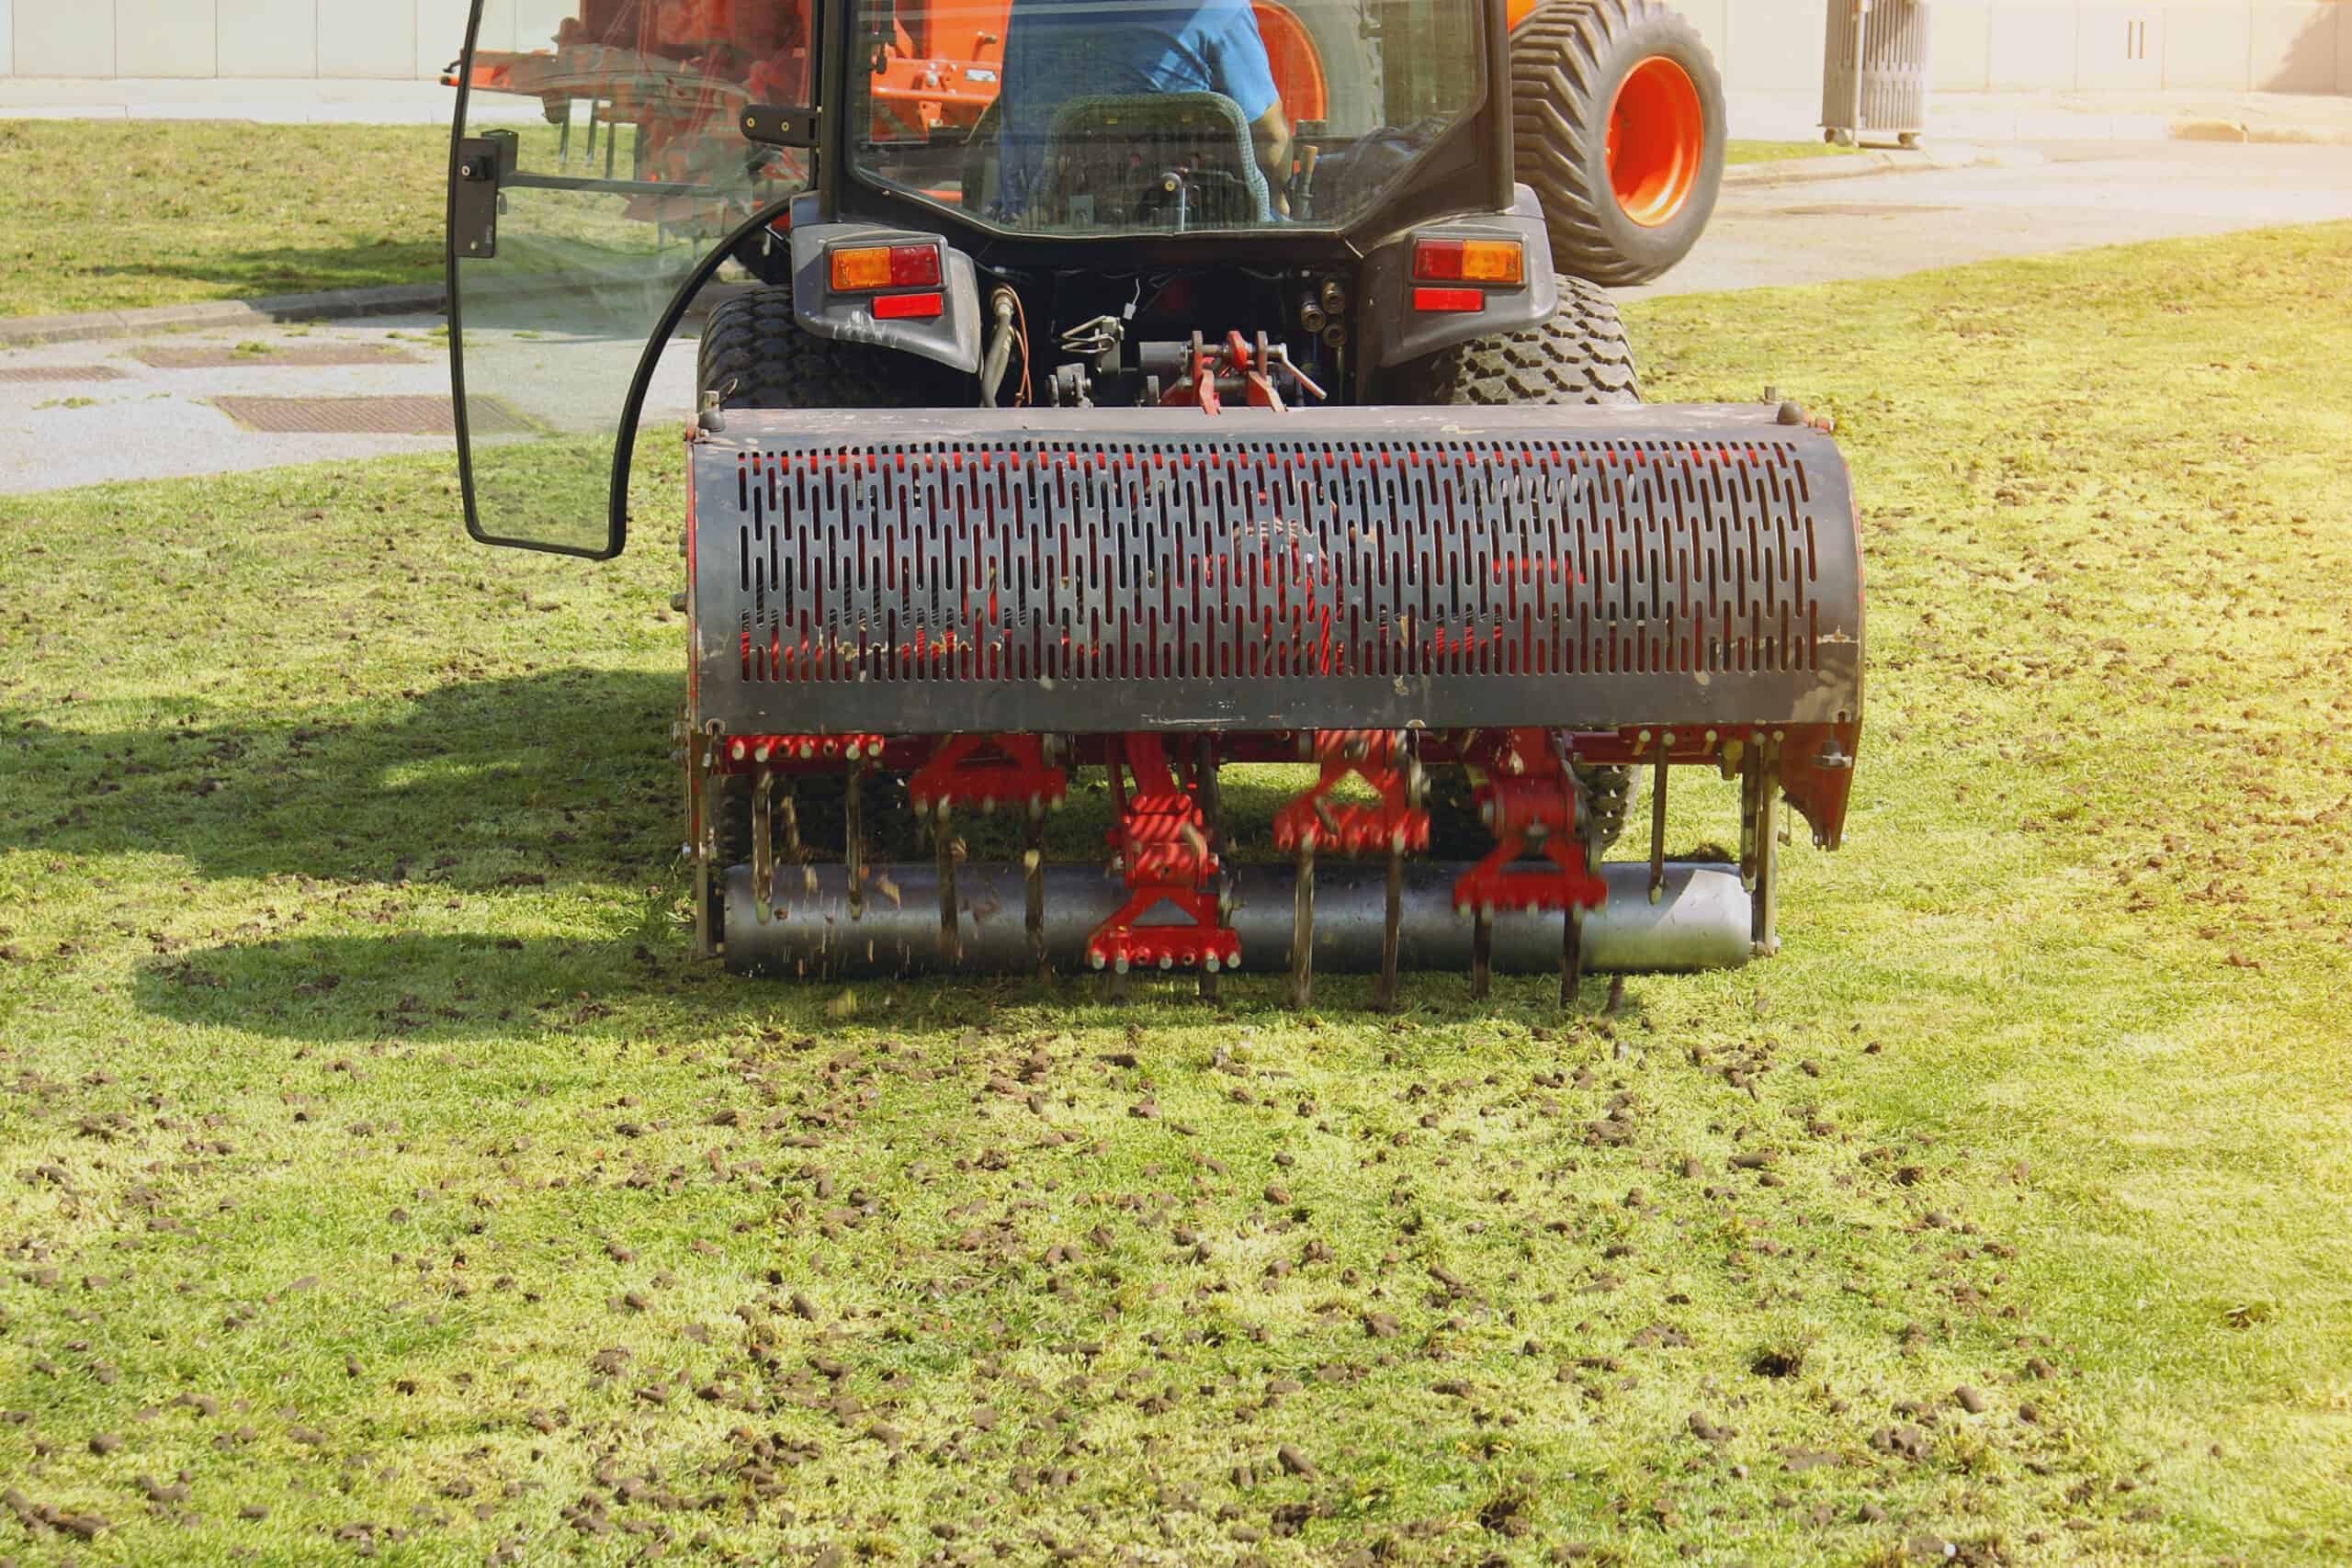 Use aeration services in PA to revive lawns and landscaping without chemicals